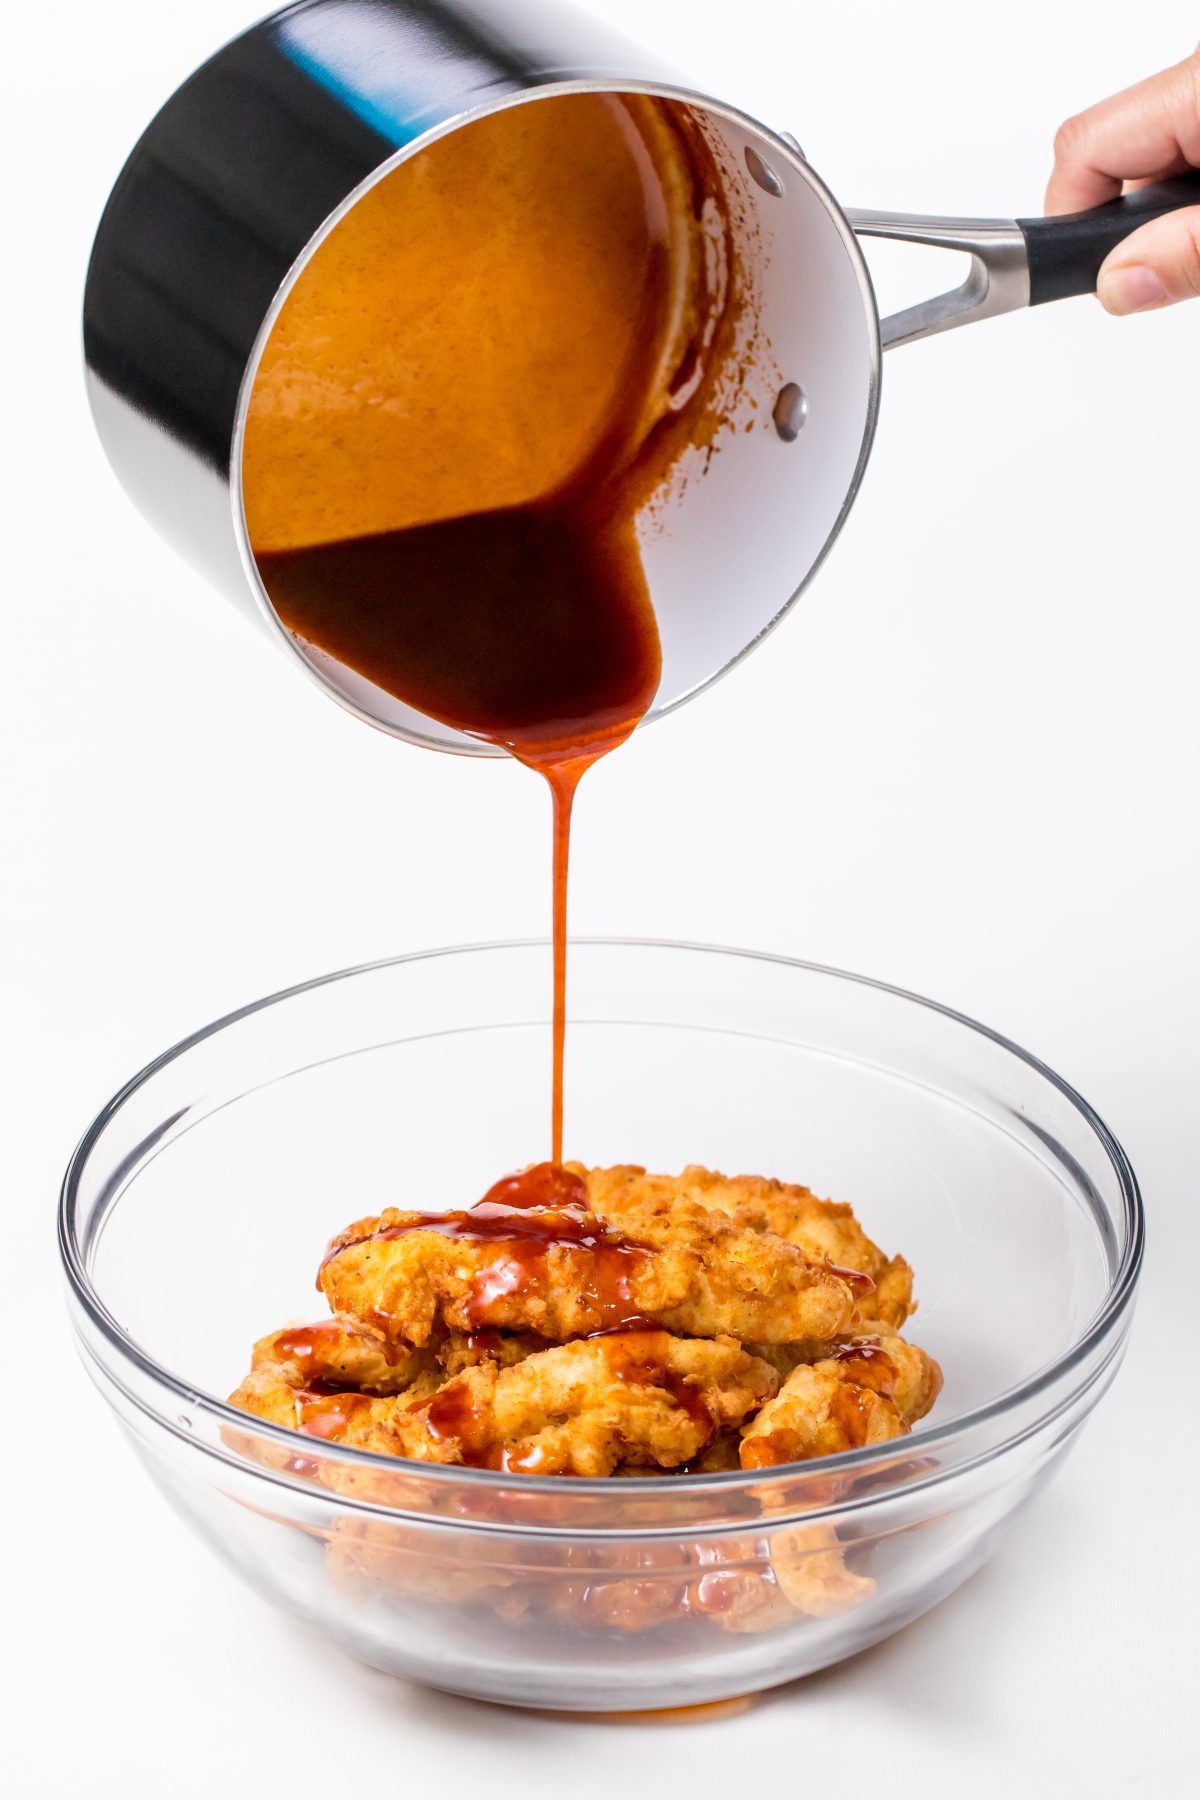 Pour honey chipotle sauce on cooked chicken